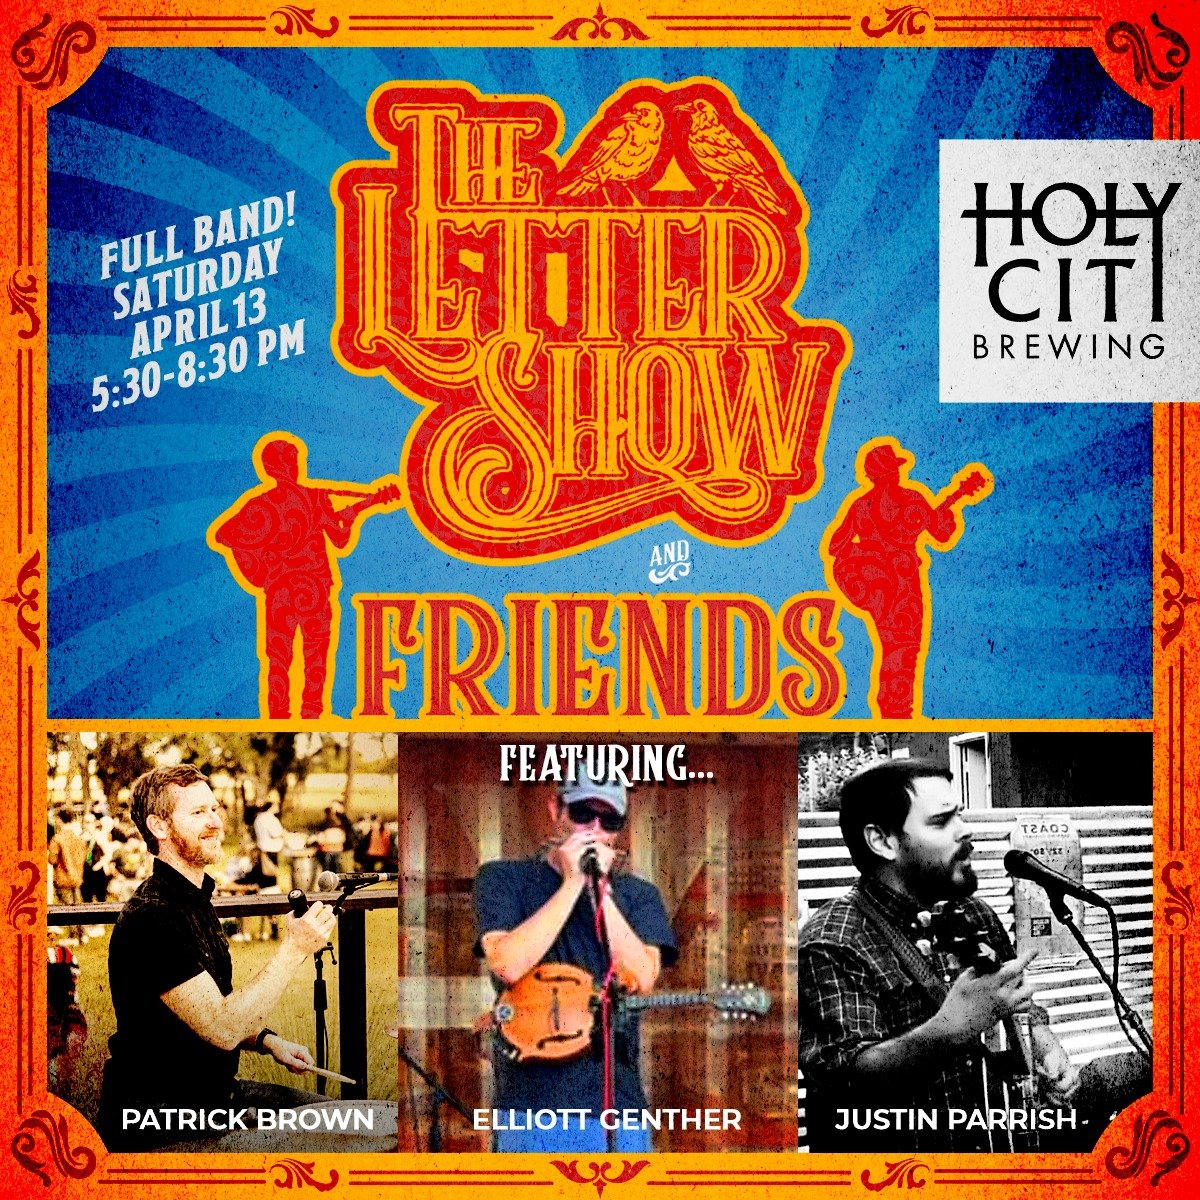 Second Saturday! Holy City Brewing! We'll be short one Becca today but we're pulling in some great players to round out the Letter Show and Friends lineup: Patrick Brown on drums, Elliott Genther on mando/guitar, and making his TLS &amp; Friends debu